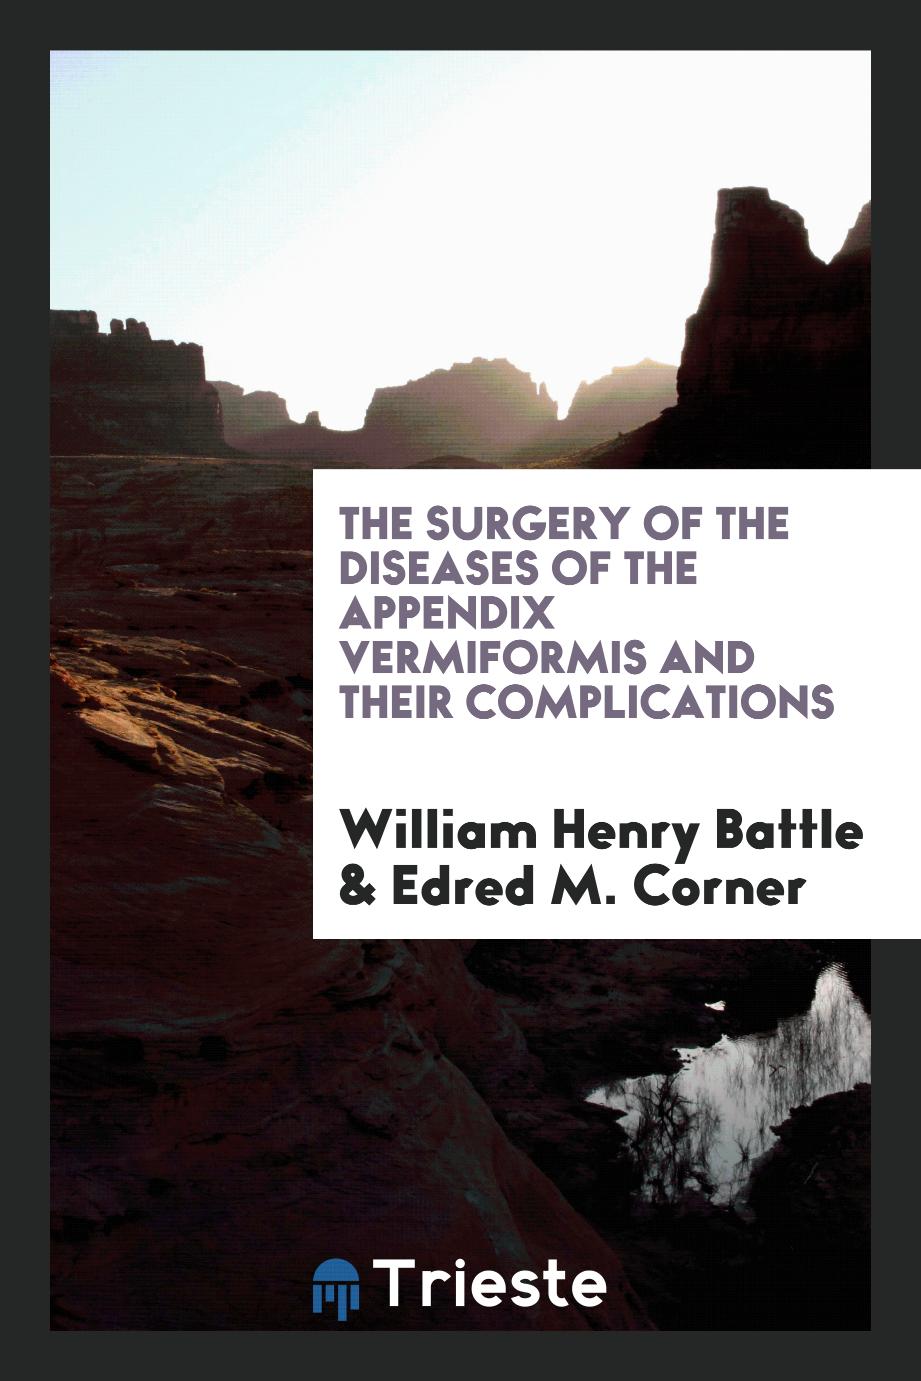 The surgery of the diseases of the appendix vermiformis and their complications